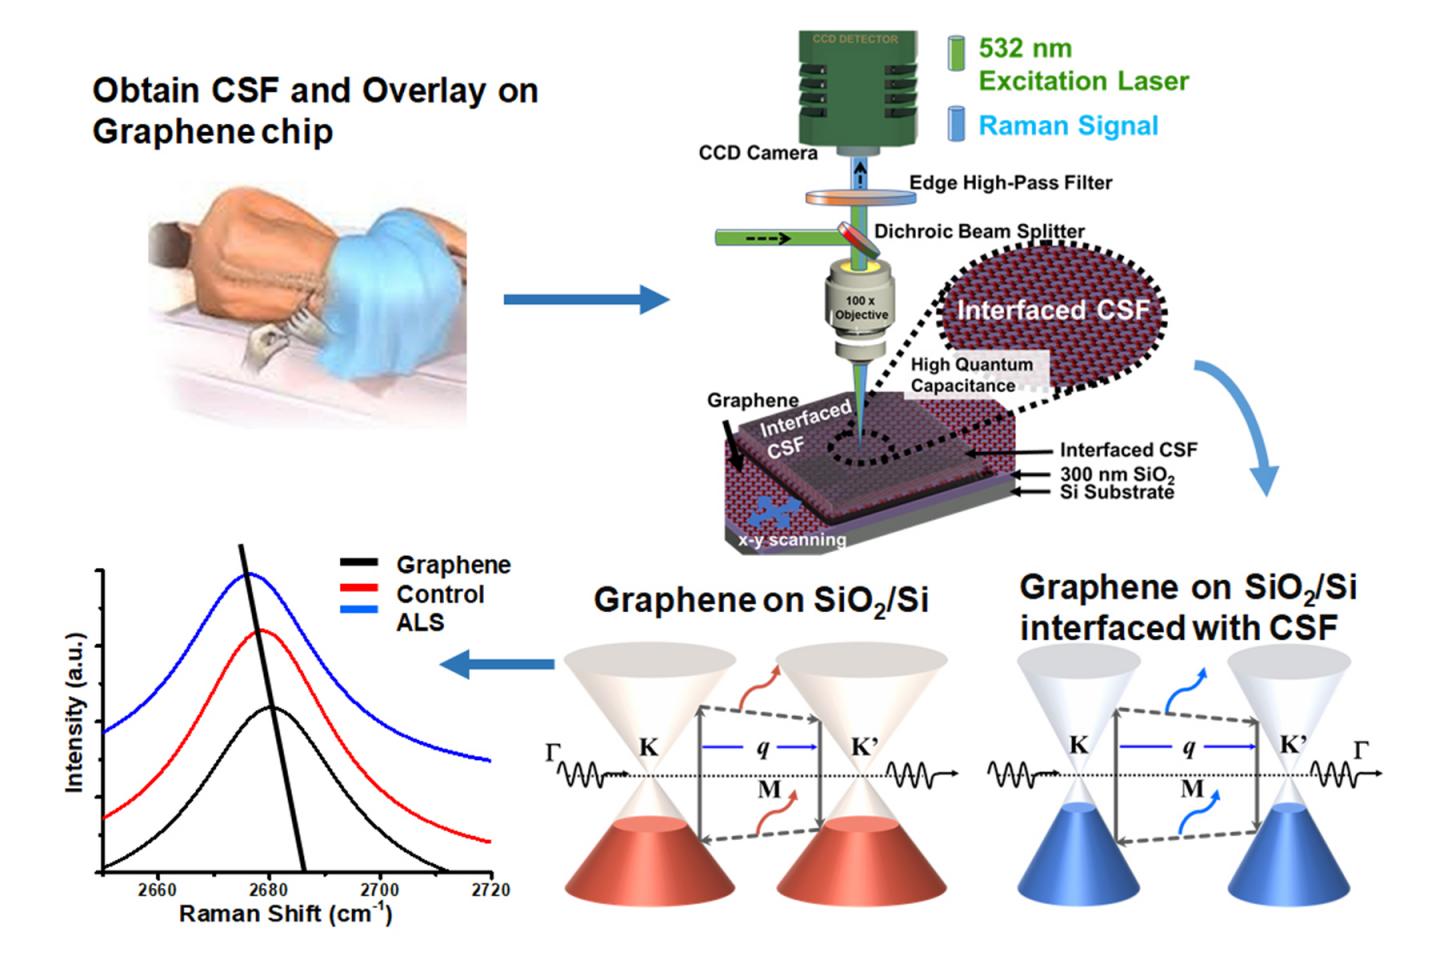 How Graphene Can be used to Detect ALS Biomarkers from Cerebrospinal Fluid